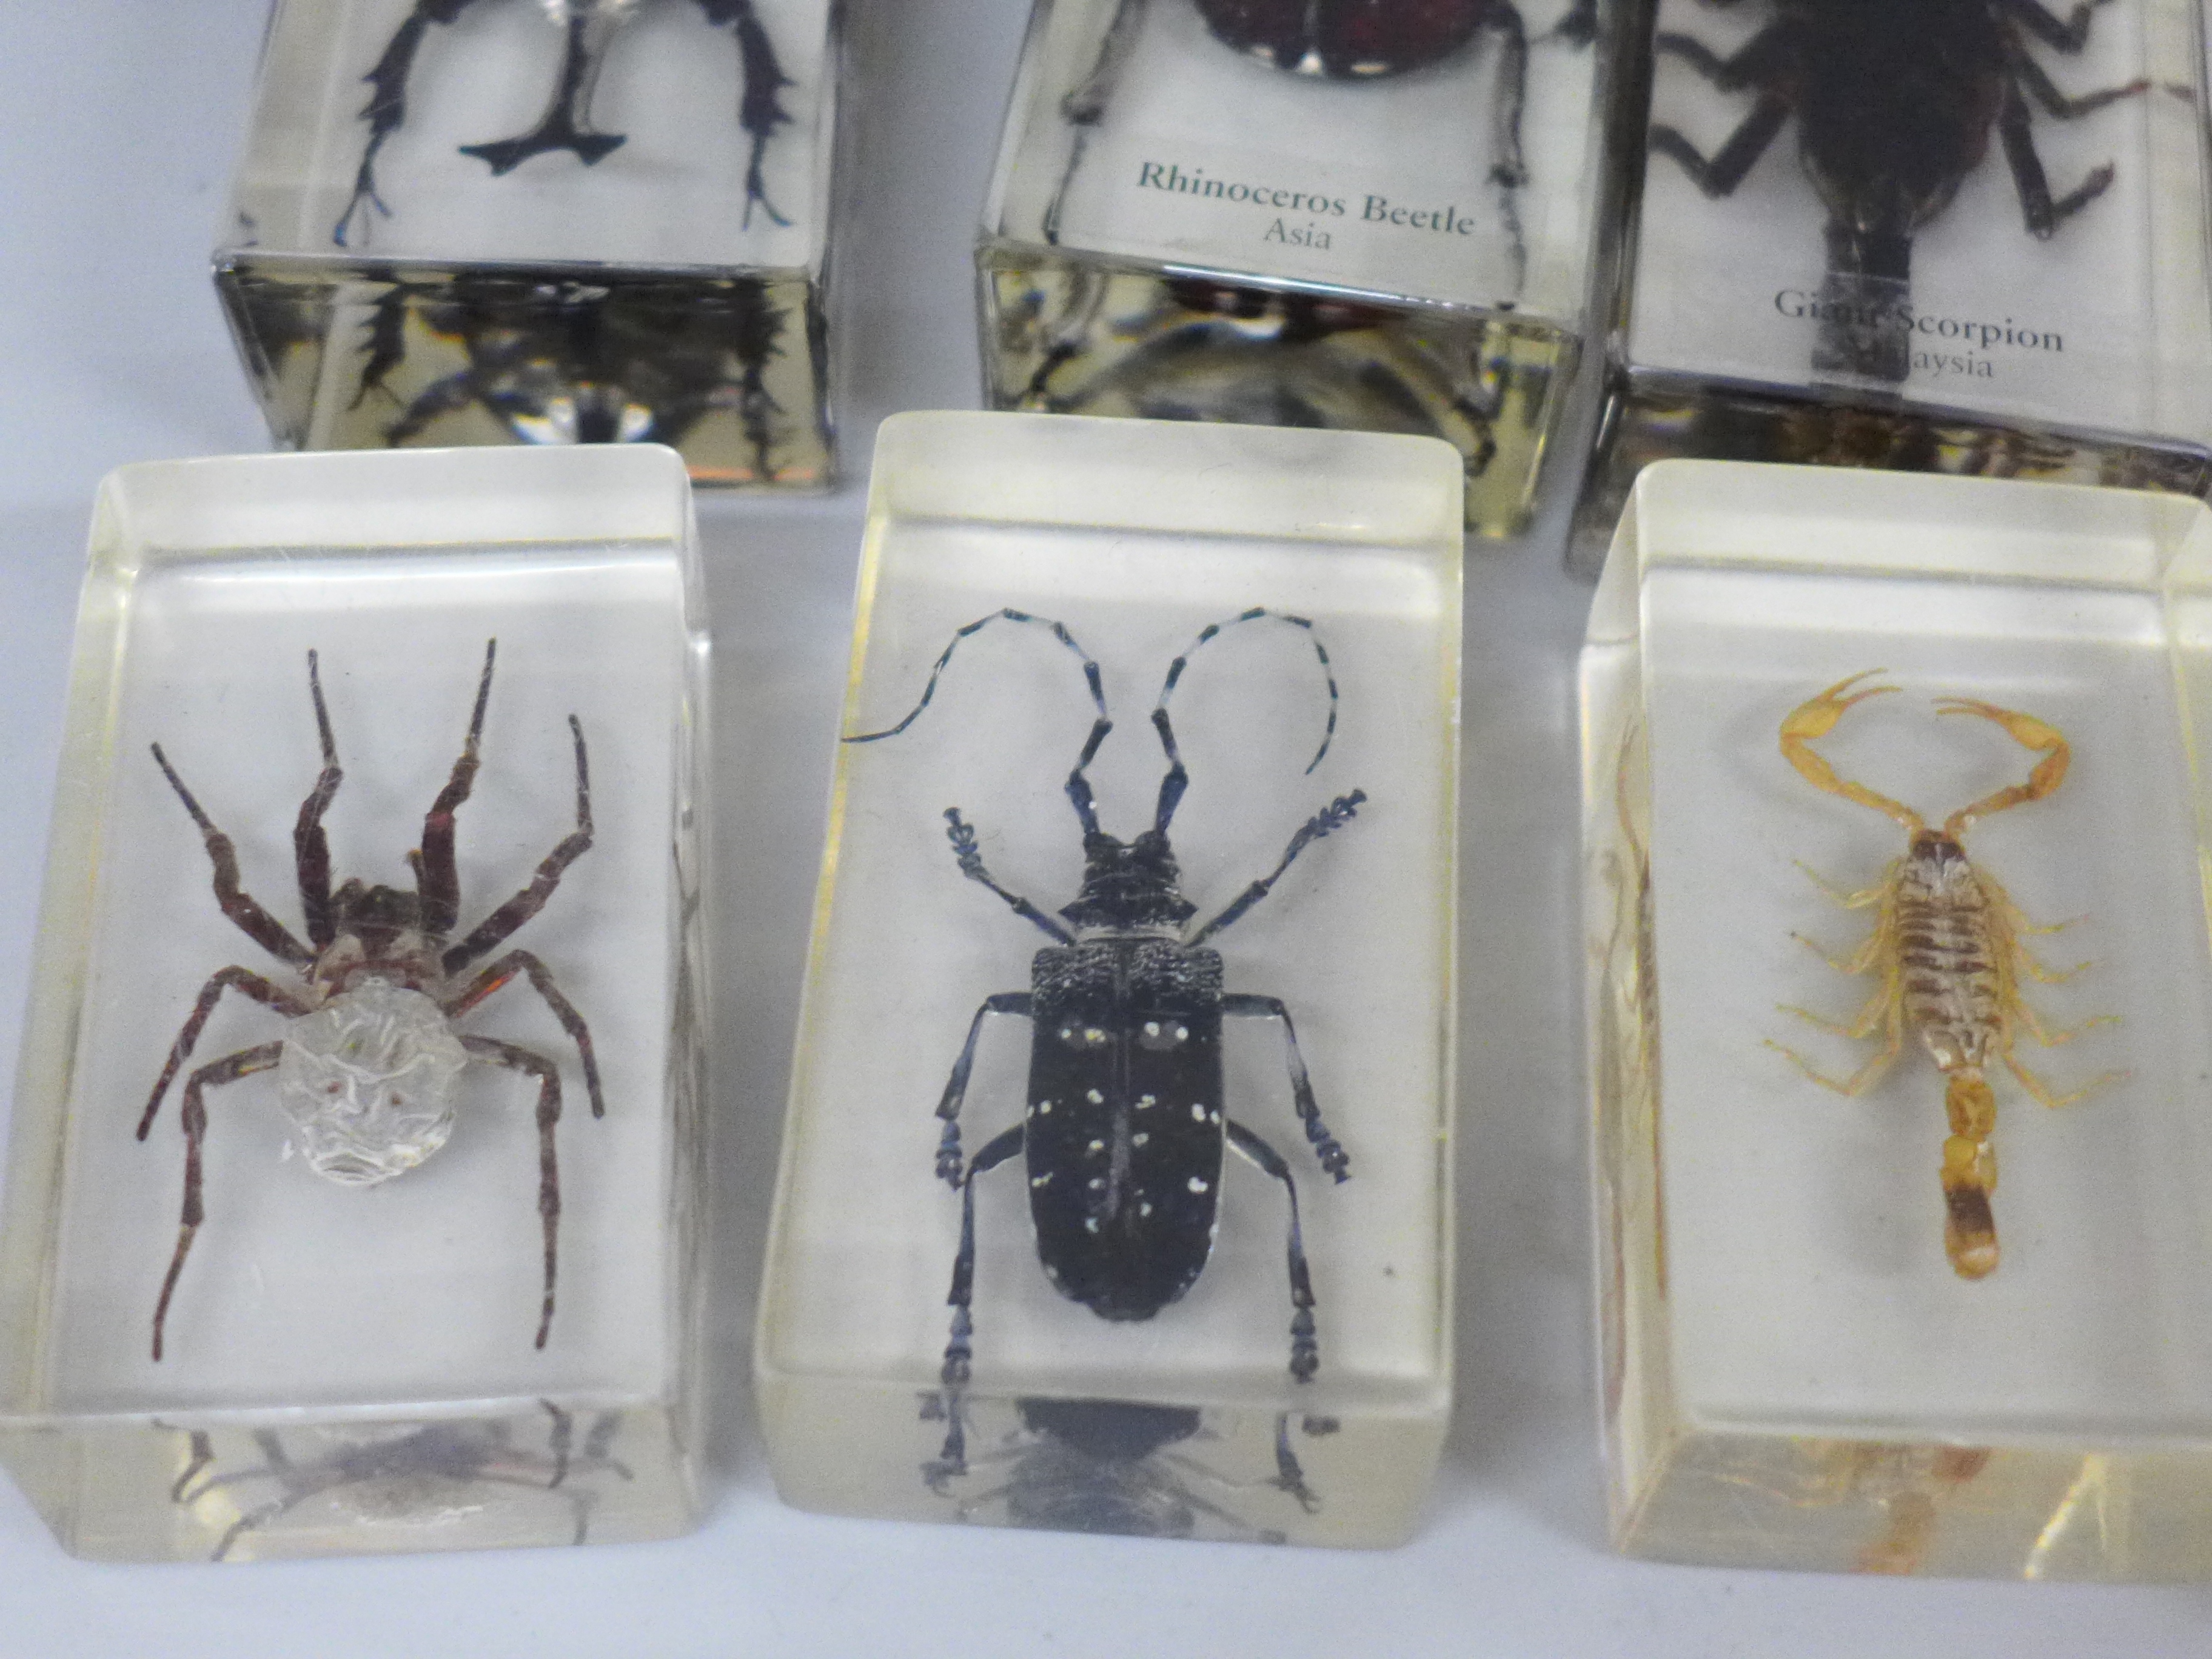 Eight insect specimens in resin, including Giant Scorpion and Rhinoceros Beetle - Image 3 of 4